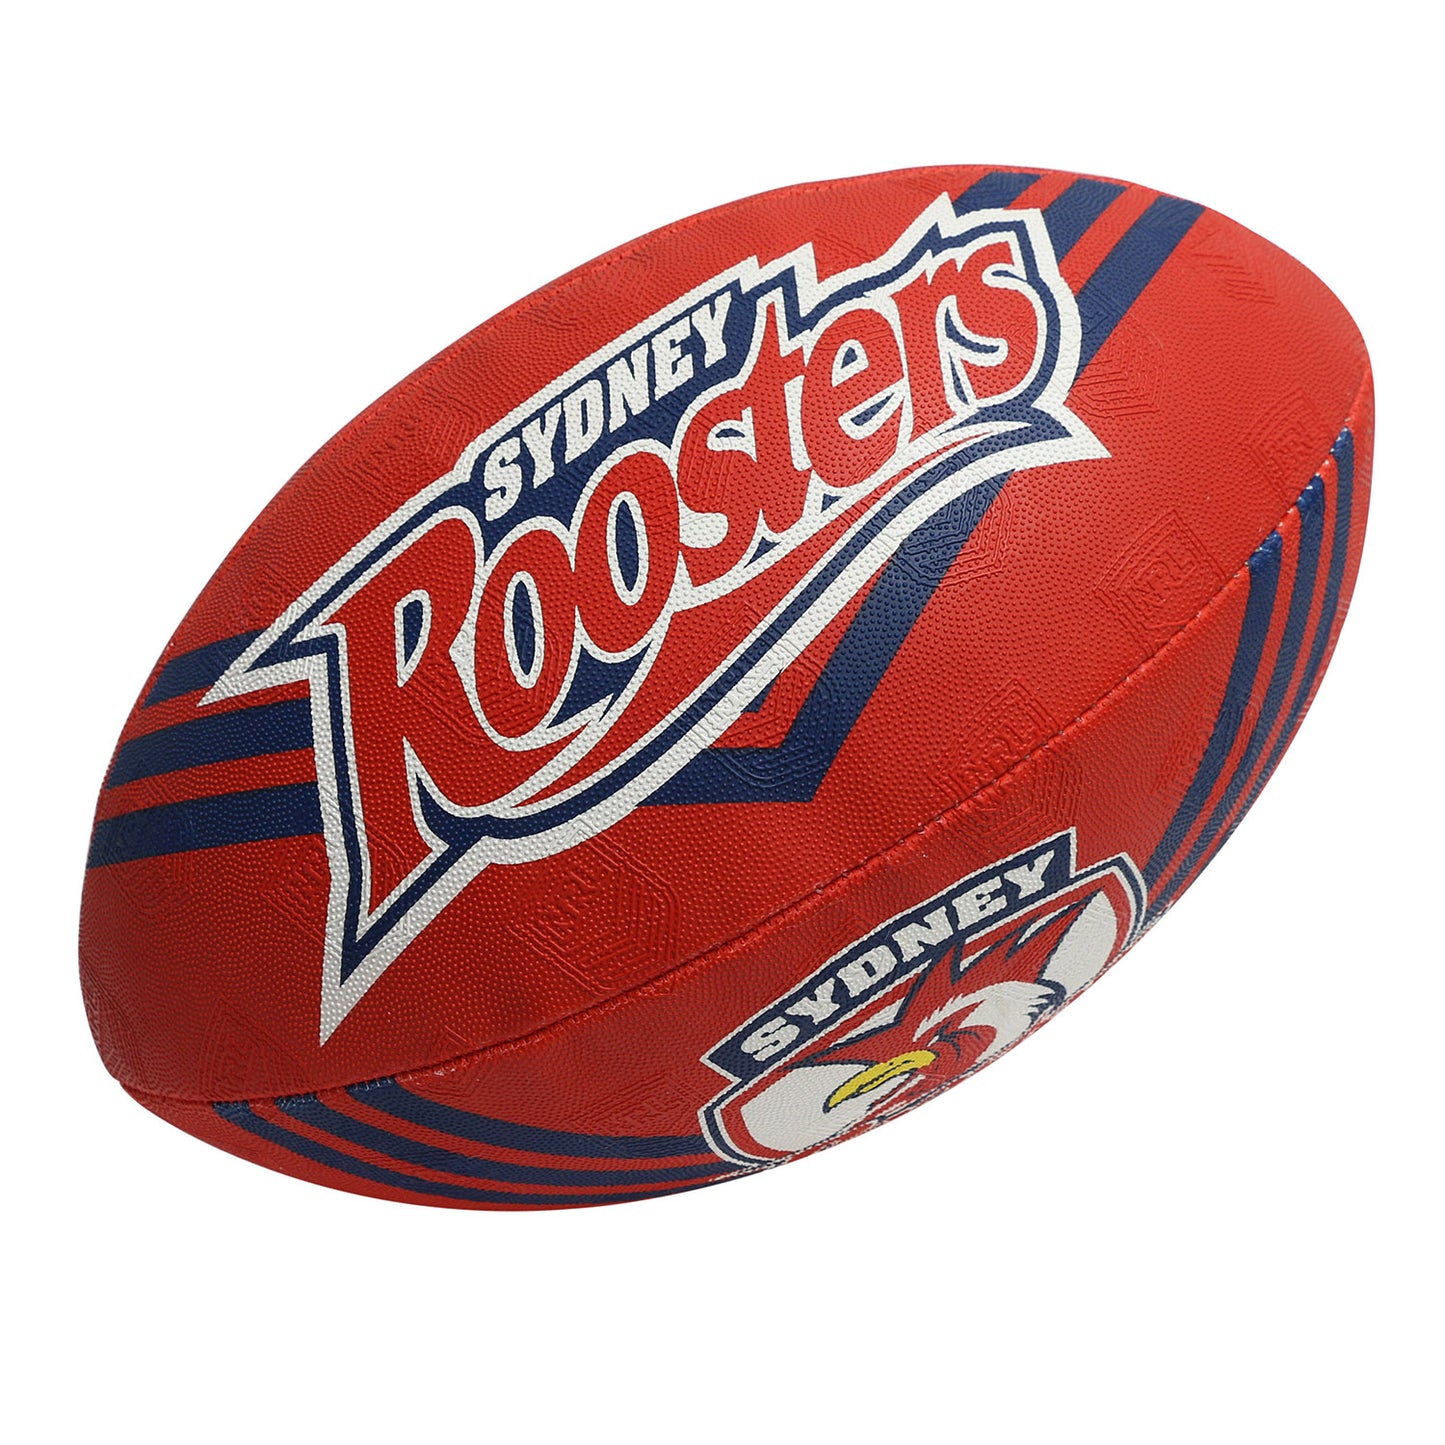 Sydney Roosters Supporter Ball